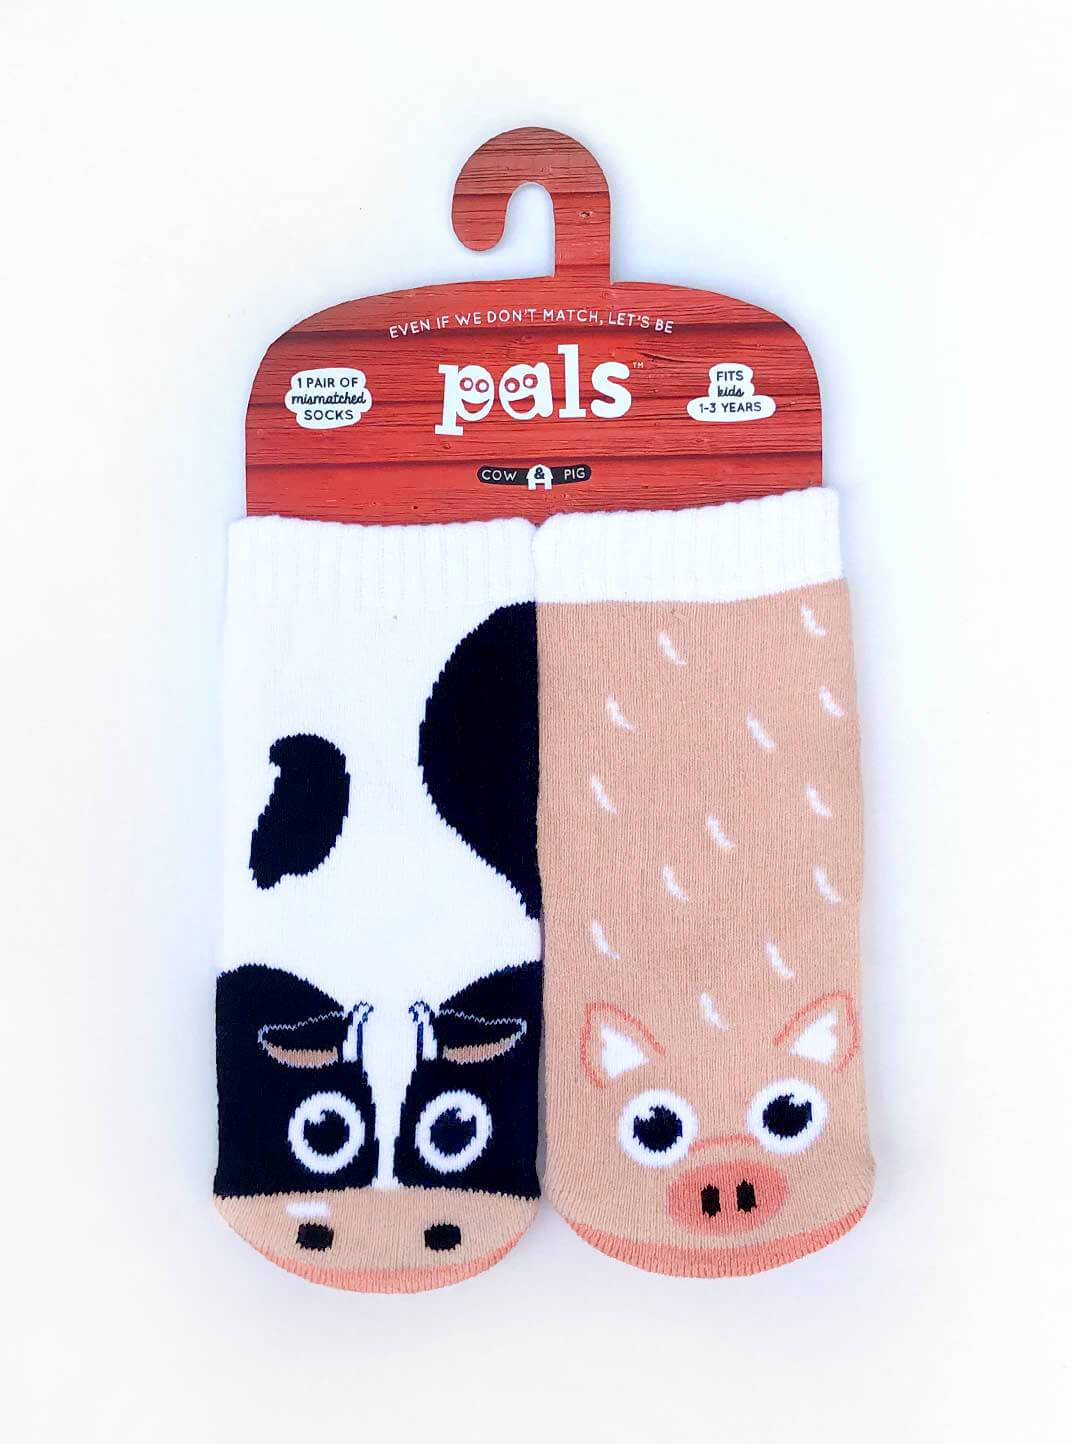 Fun mismatched socks Cow and Pig-RESTOCK!  A Touch of Magnolia Boutique   